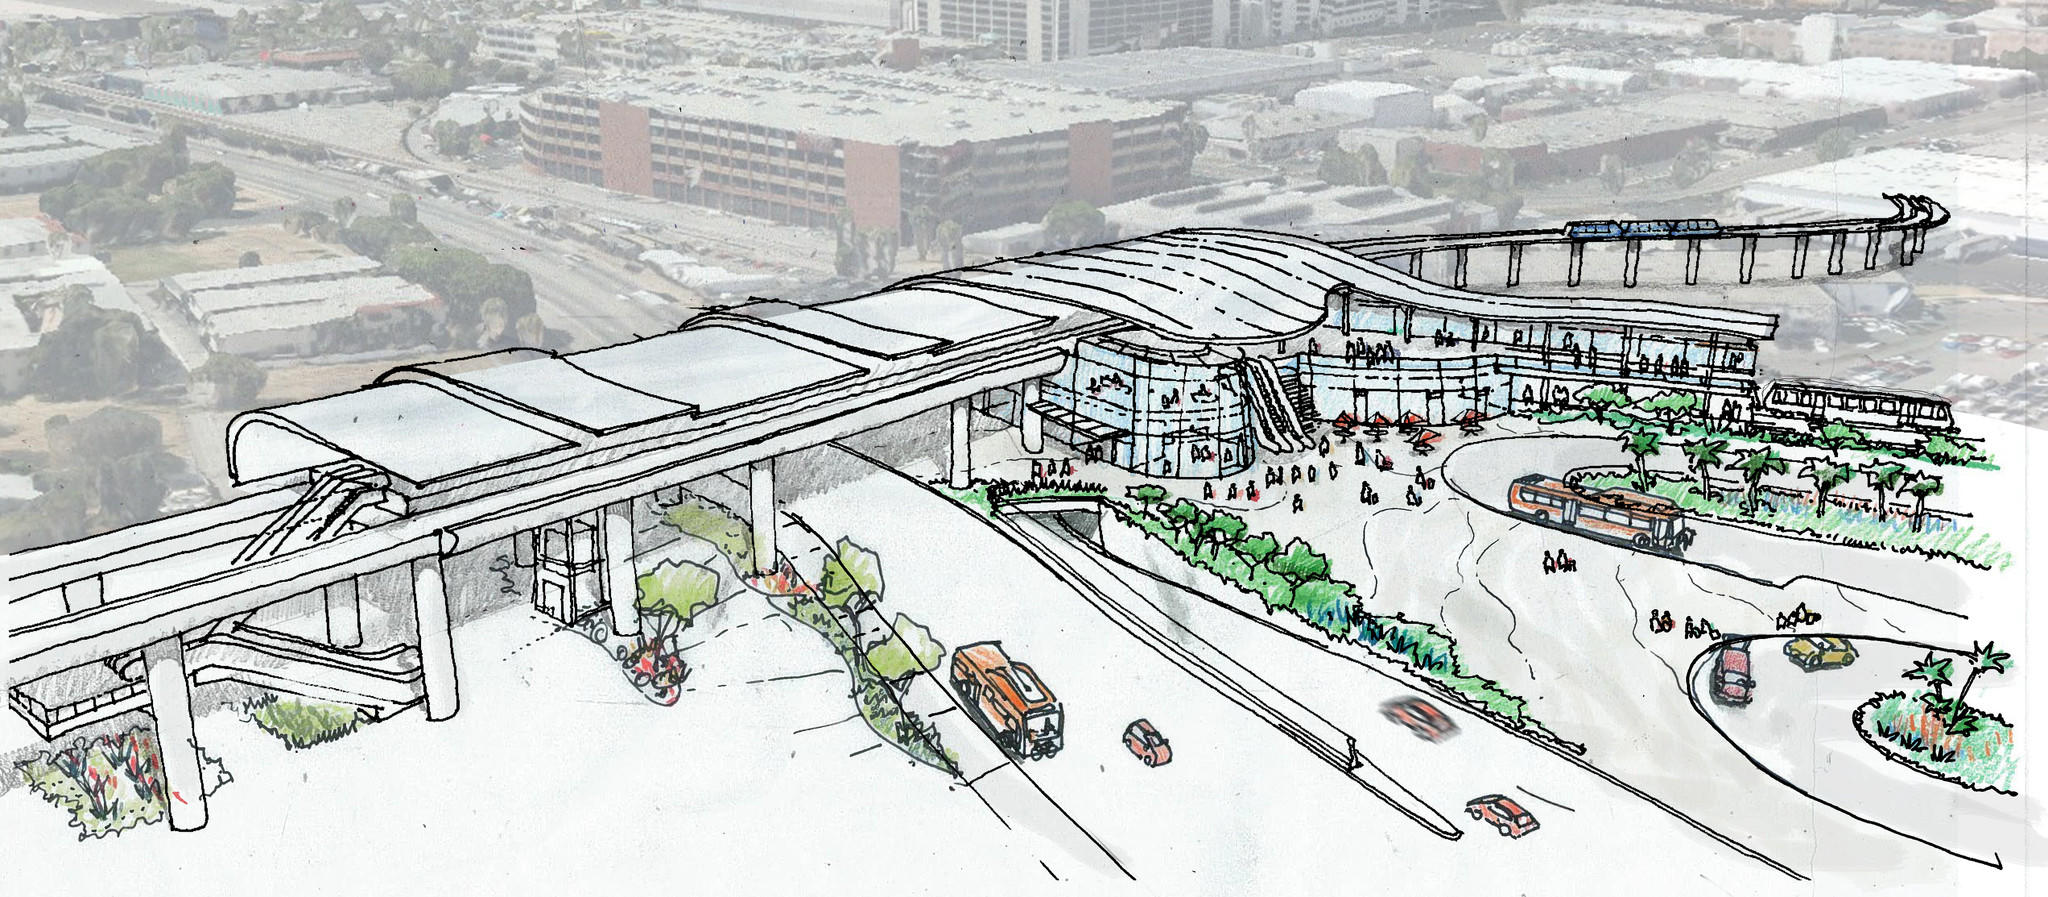 Artist's concept sketch of the light-rail station to be built at 96th Street and Aviation Boulevard, where passengers will board an aerial circulator train to their terminals.